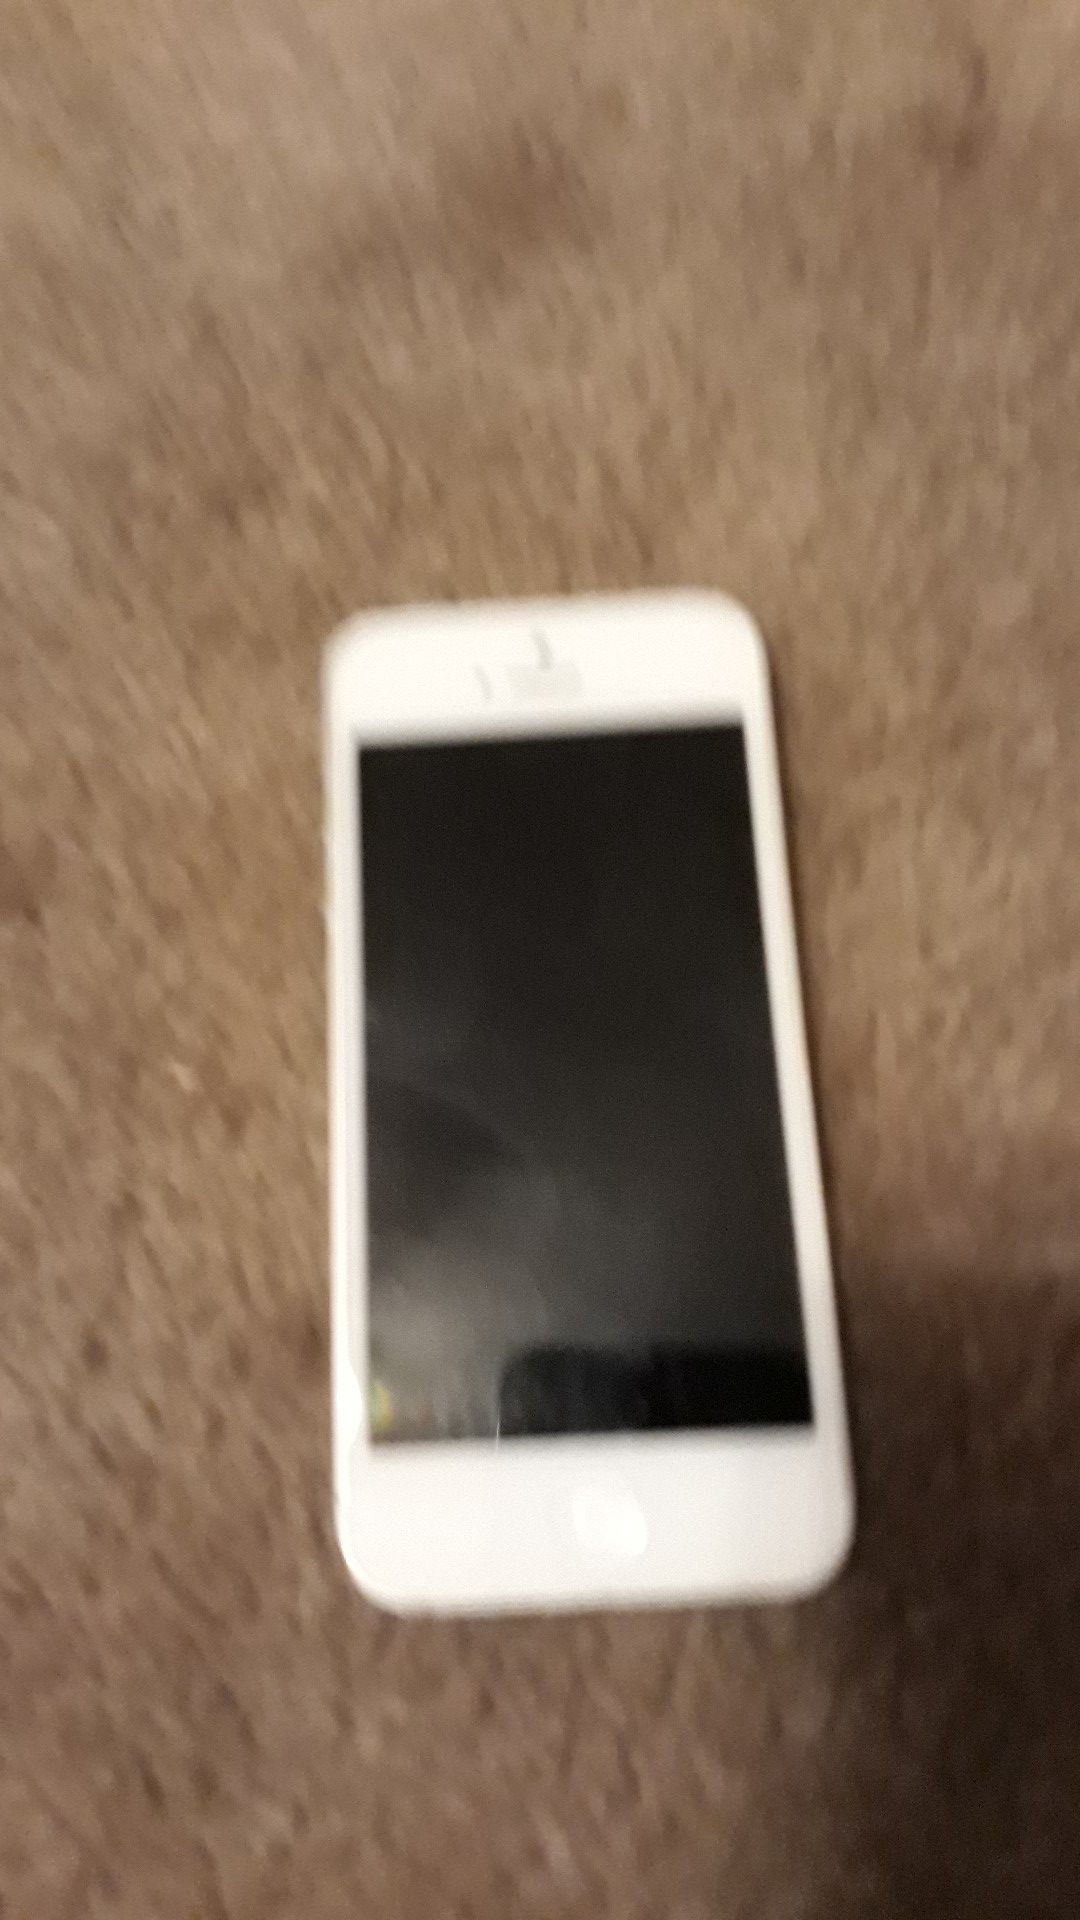 iPhone 5. AT&T. screen issue